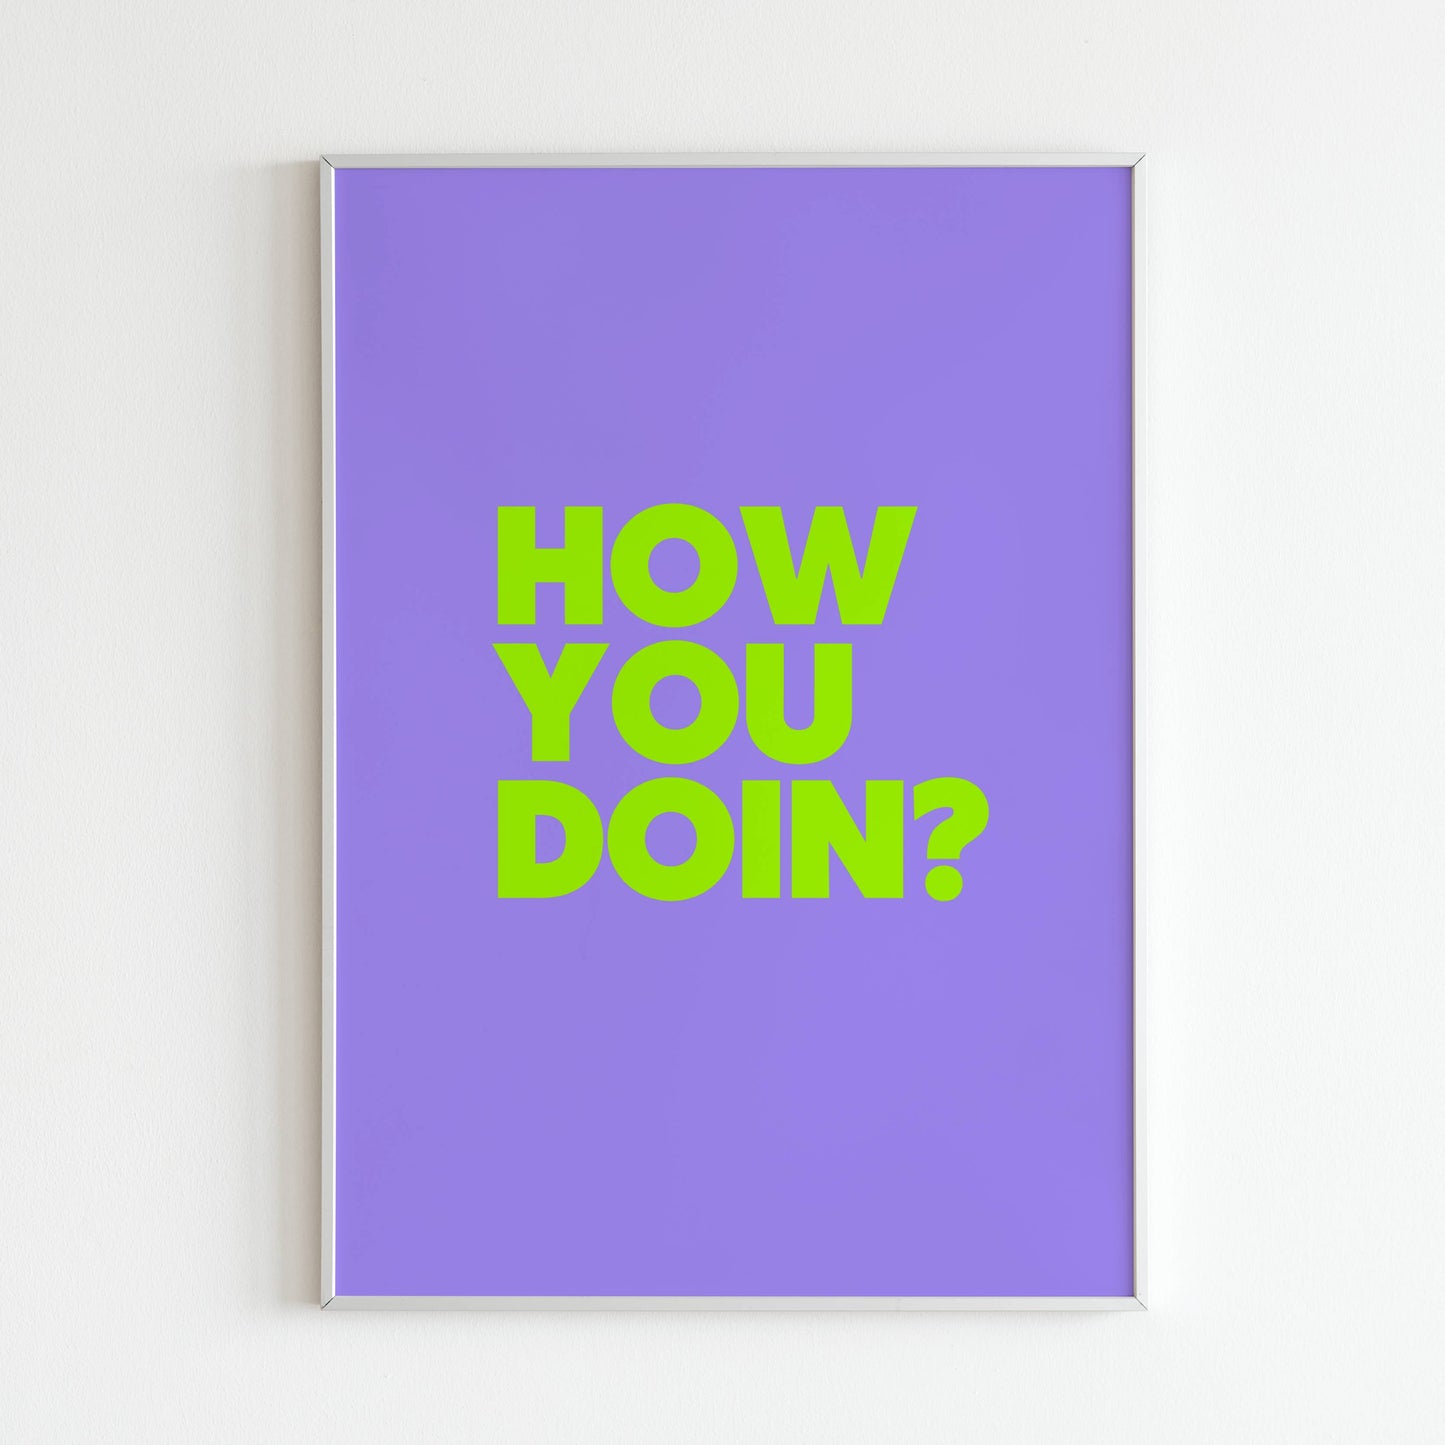 Downloadable "How you doin?" art print, inspire conversation and connection.